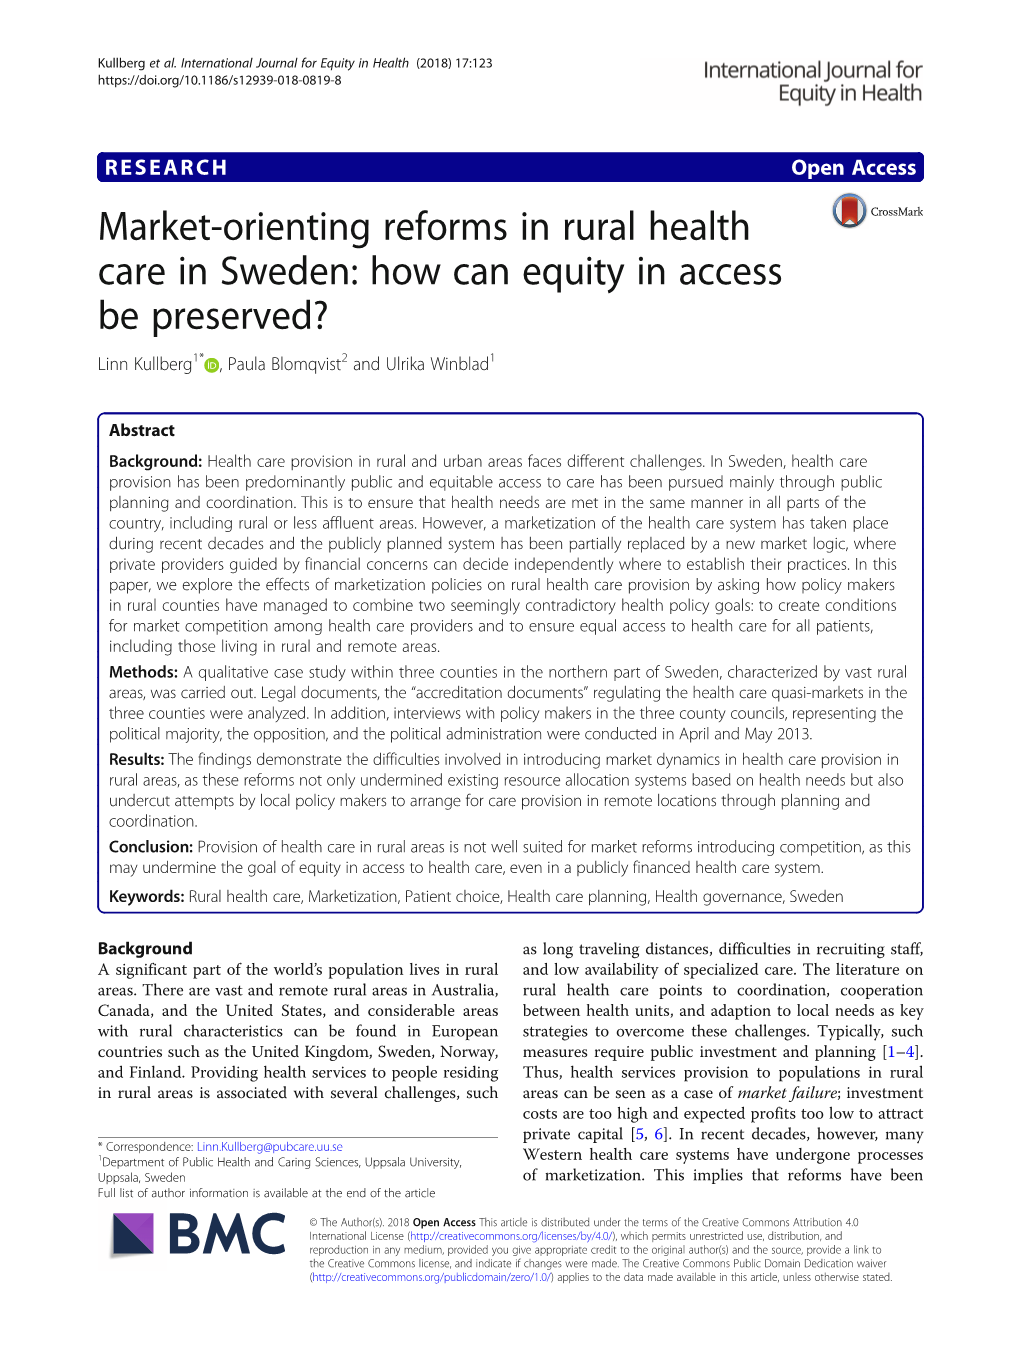 Market-Orienting Reforms in Rural Health Care in Sweden: How Can Equity in Access Be Preserved? Linn Kullberg1* , Paula Blomqvist2 and Ulrika Winblad1